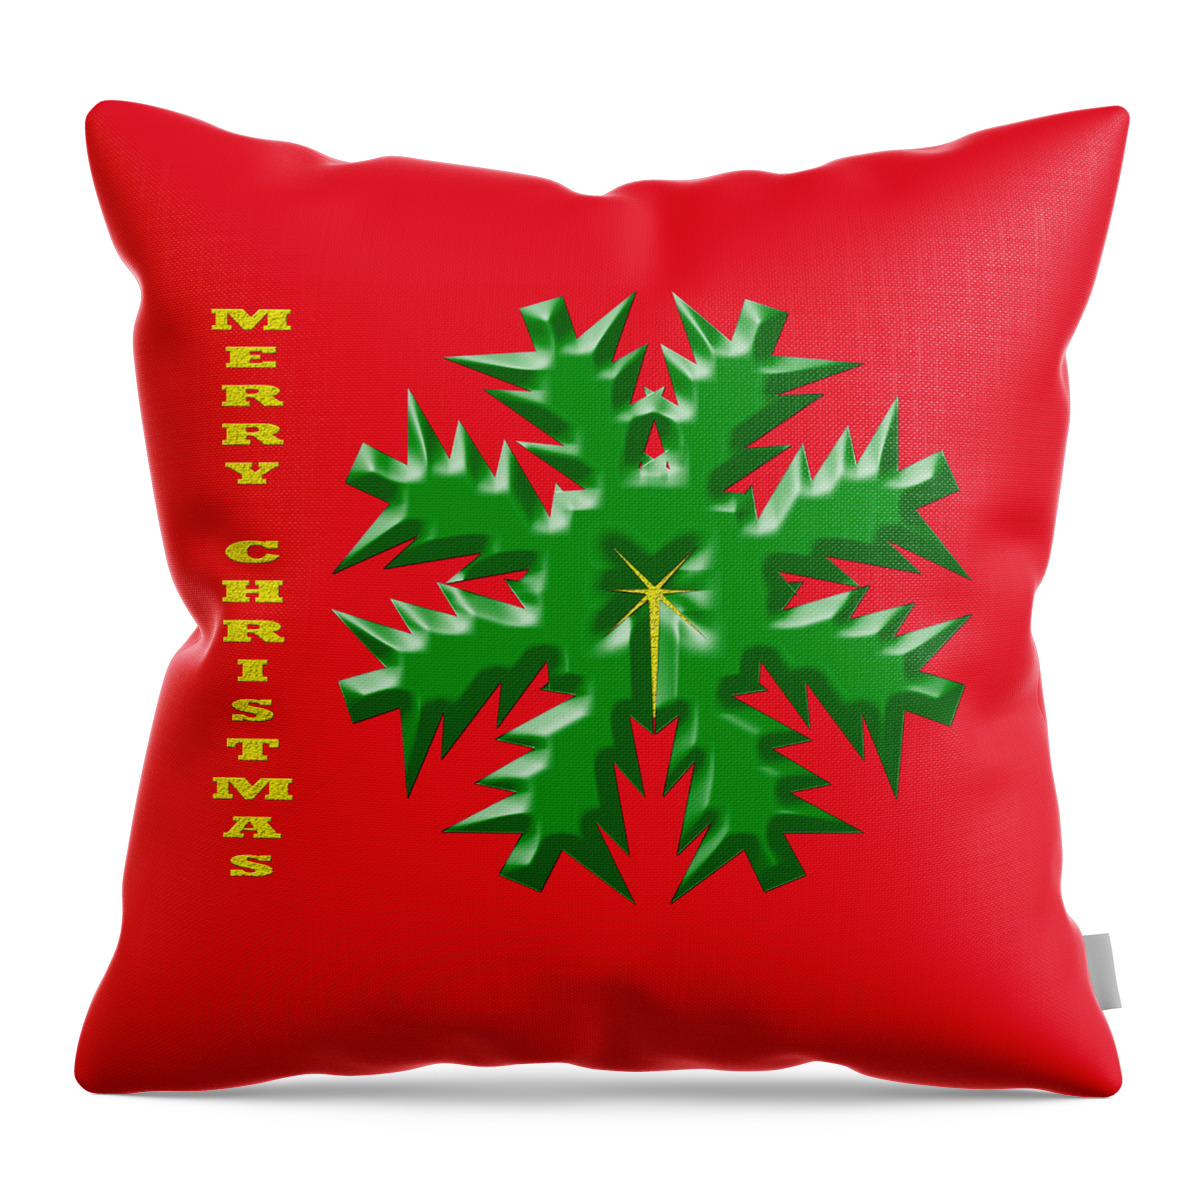 Christmas Throw Pillow featuring the digital art Christmas Card 1 by Kristy Jeppson